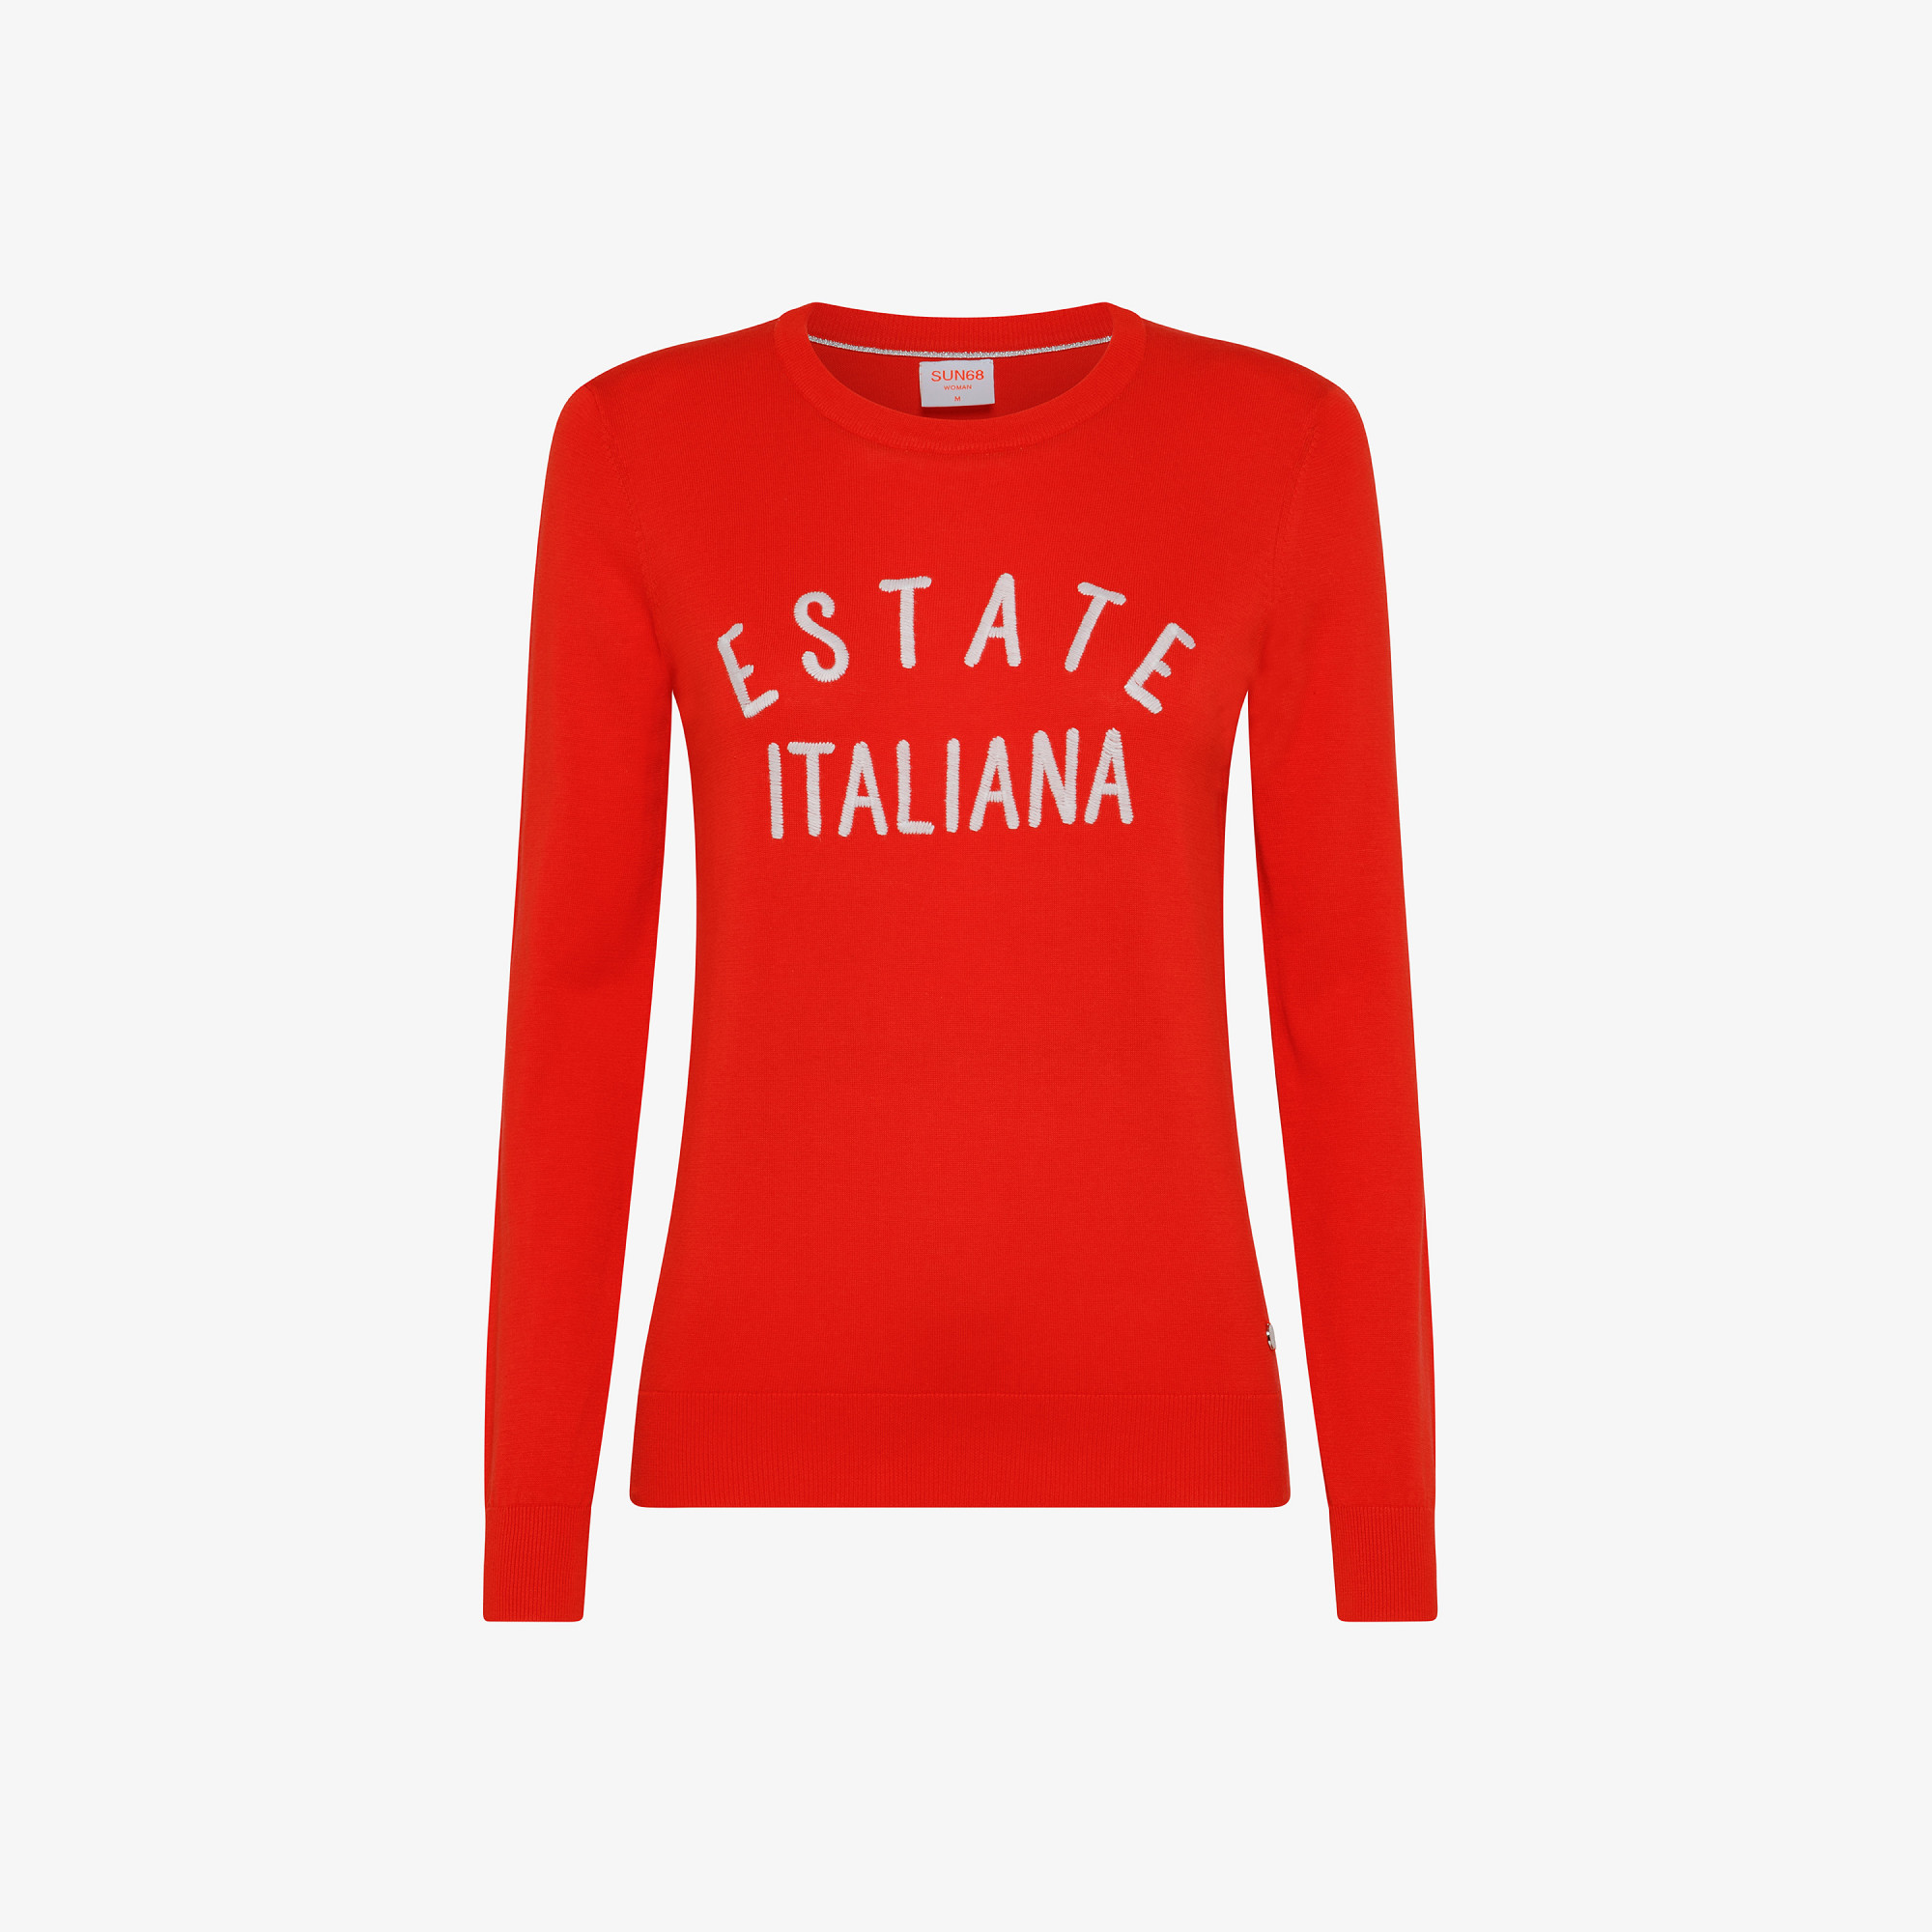 ROUND JACQUARD WORD L/S CORAL